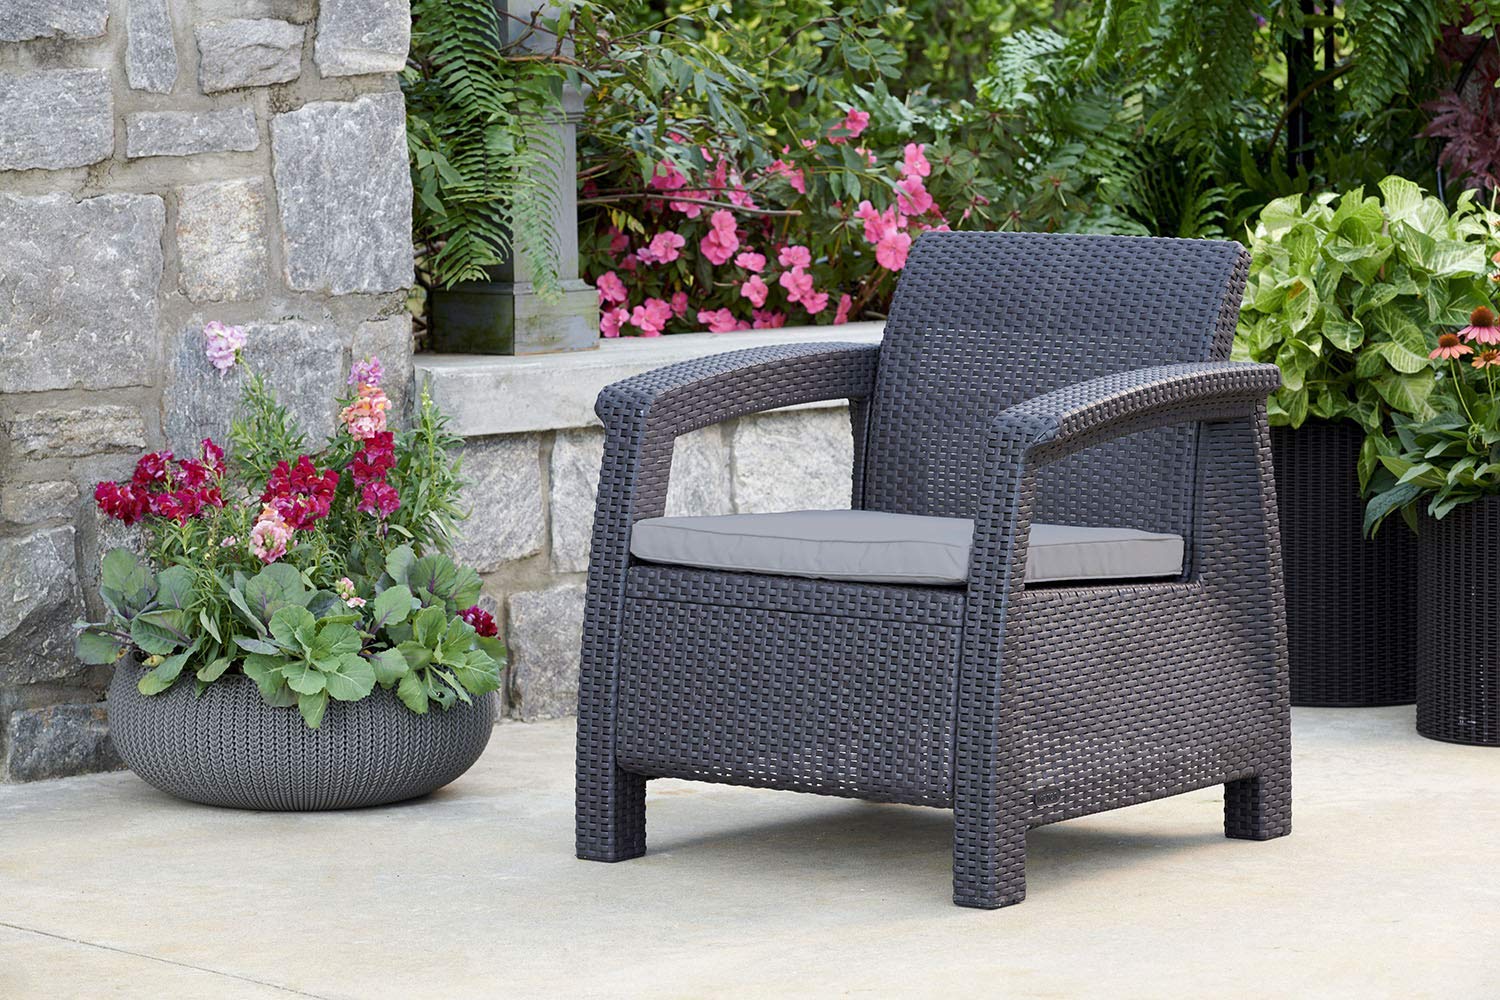 Save On Outdoor Furniture On Amazon As Low As 43 Shipped The